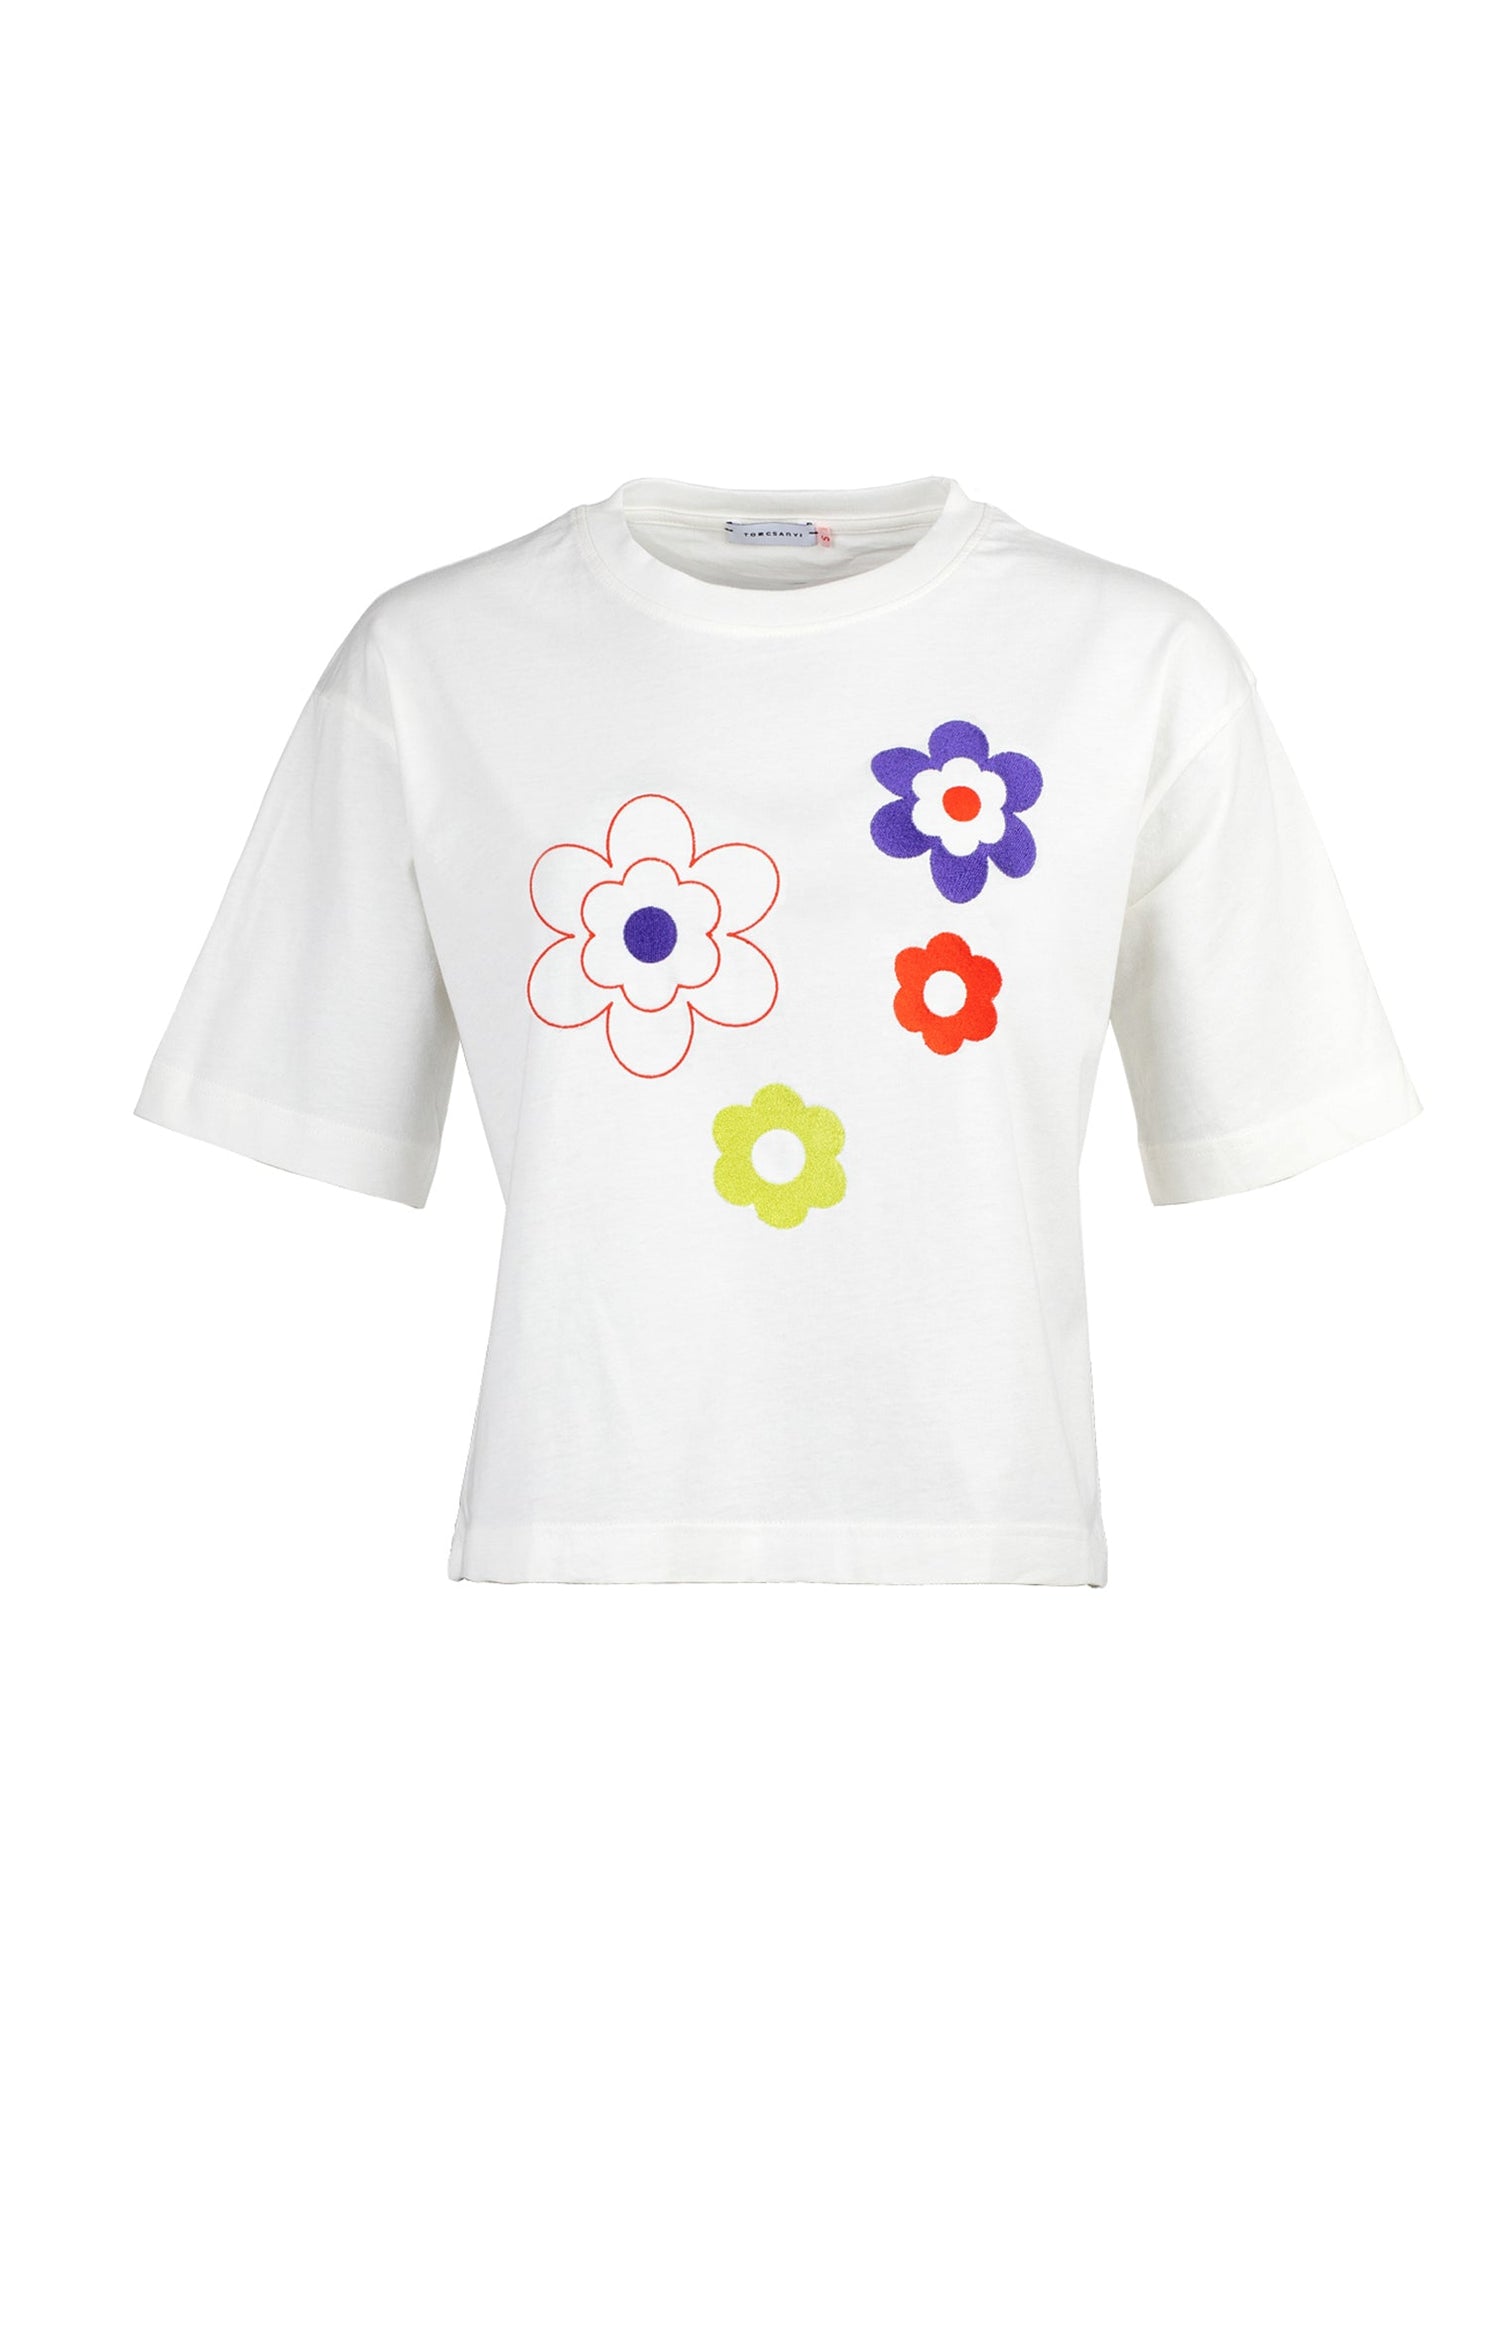 Marla T-Shirt White Space Flowers